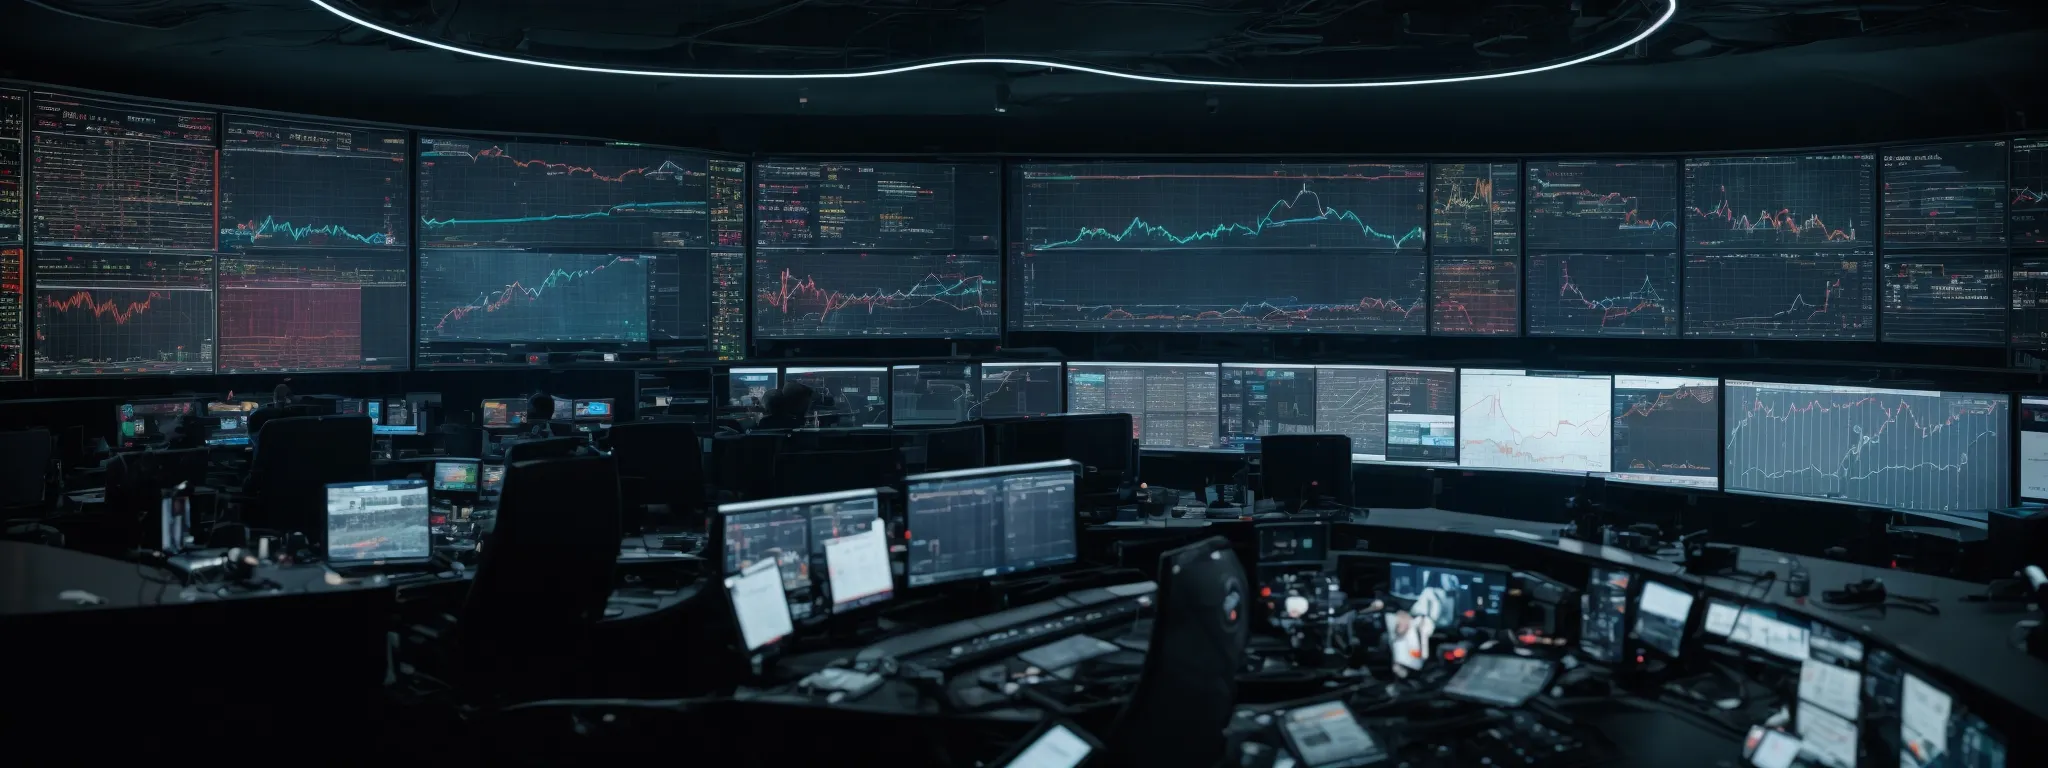 a panoramic view of a high-tech control room with multiple screens displaying graphs and analytics.